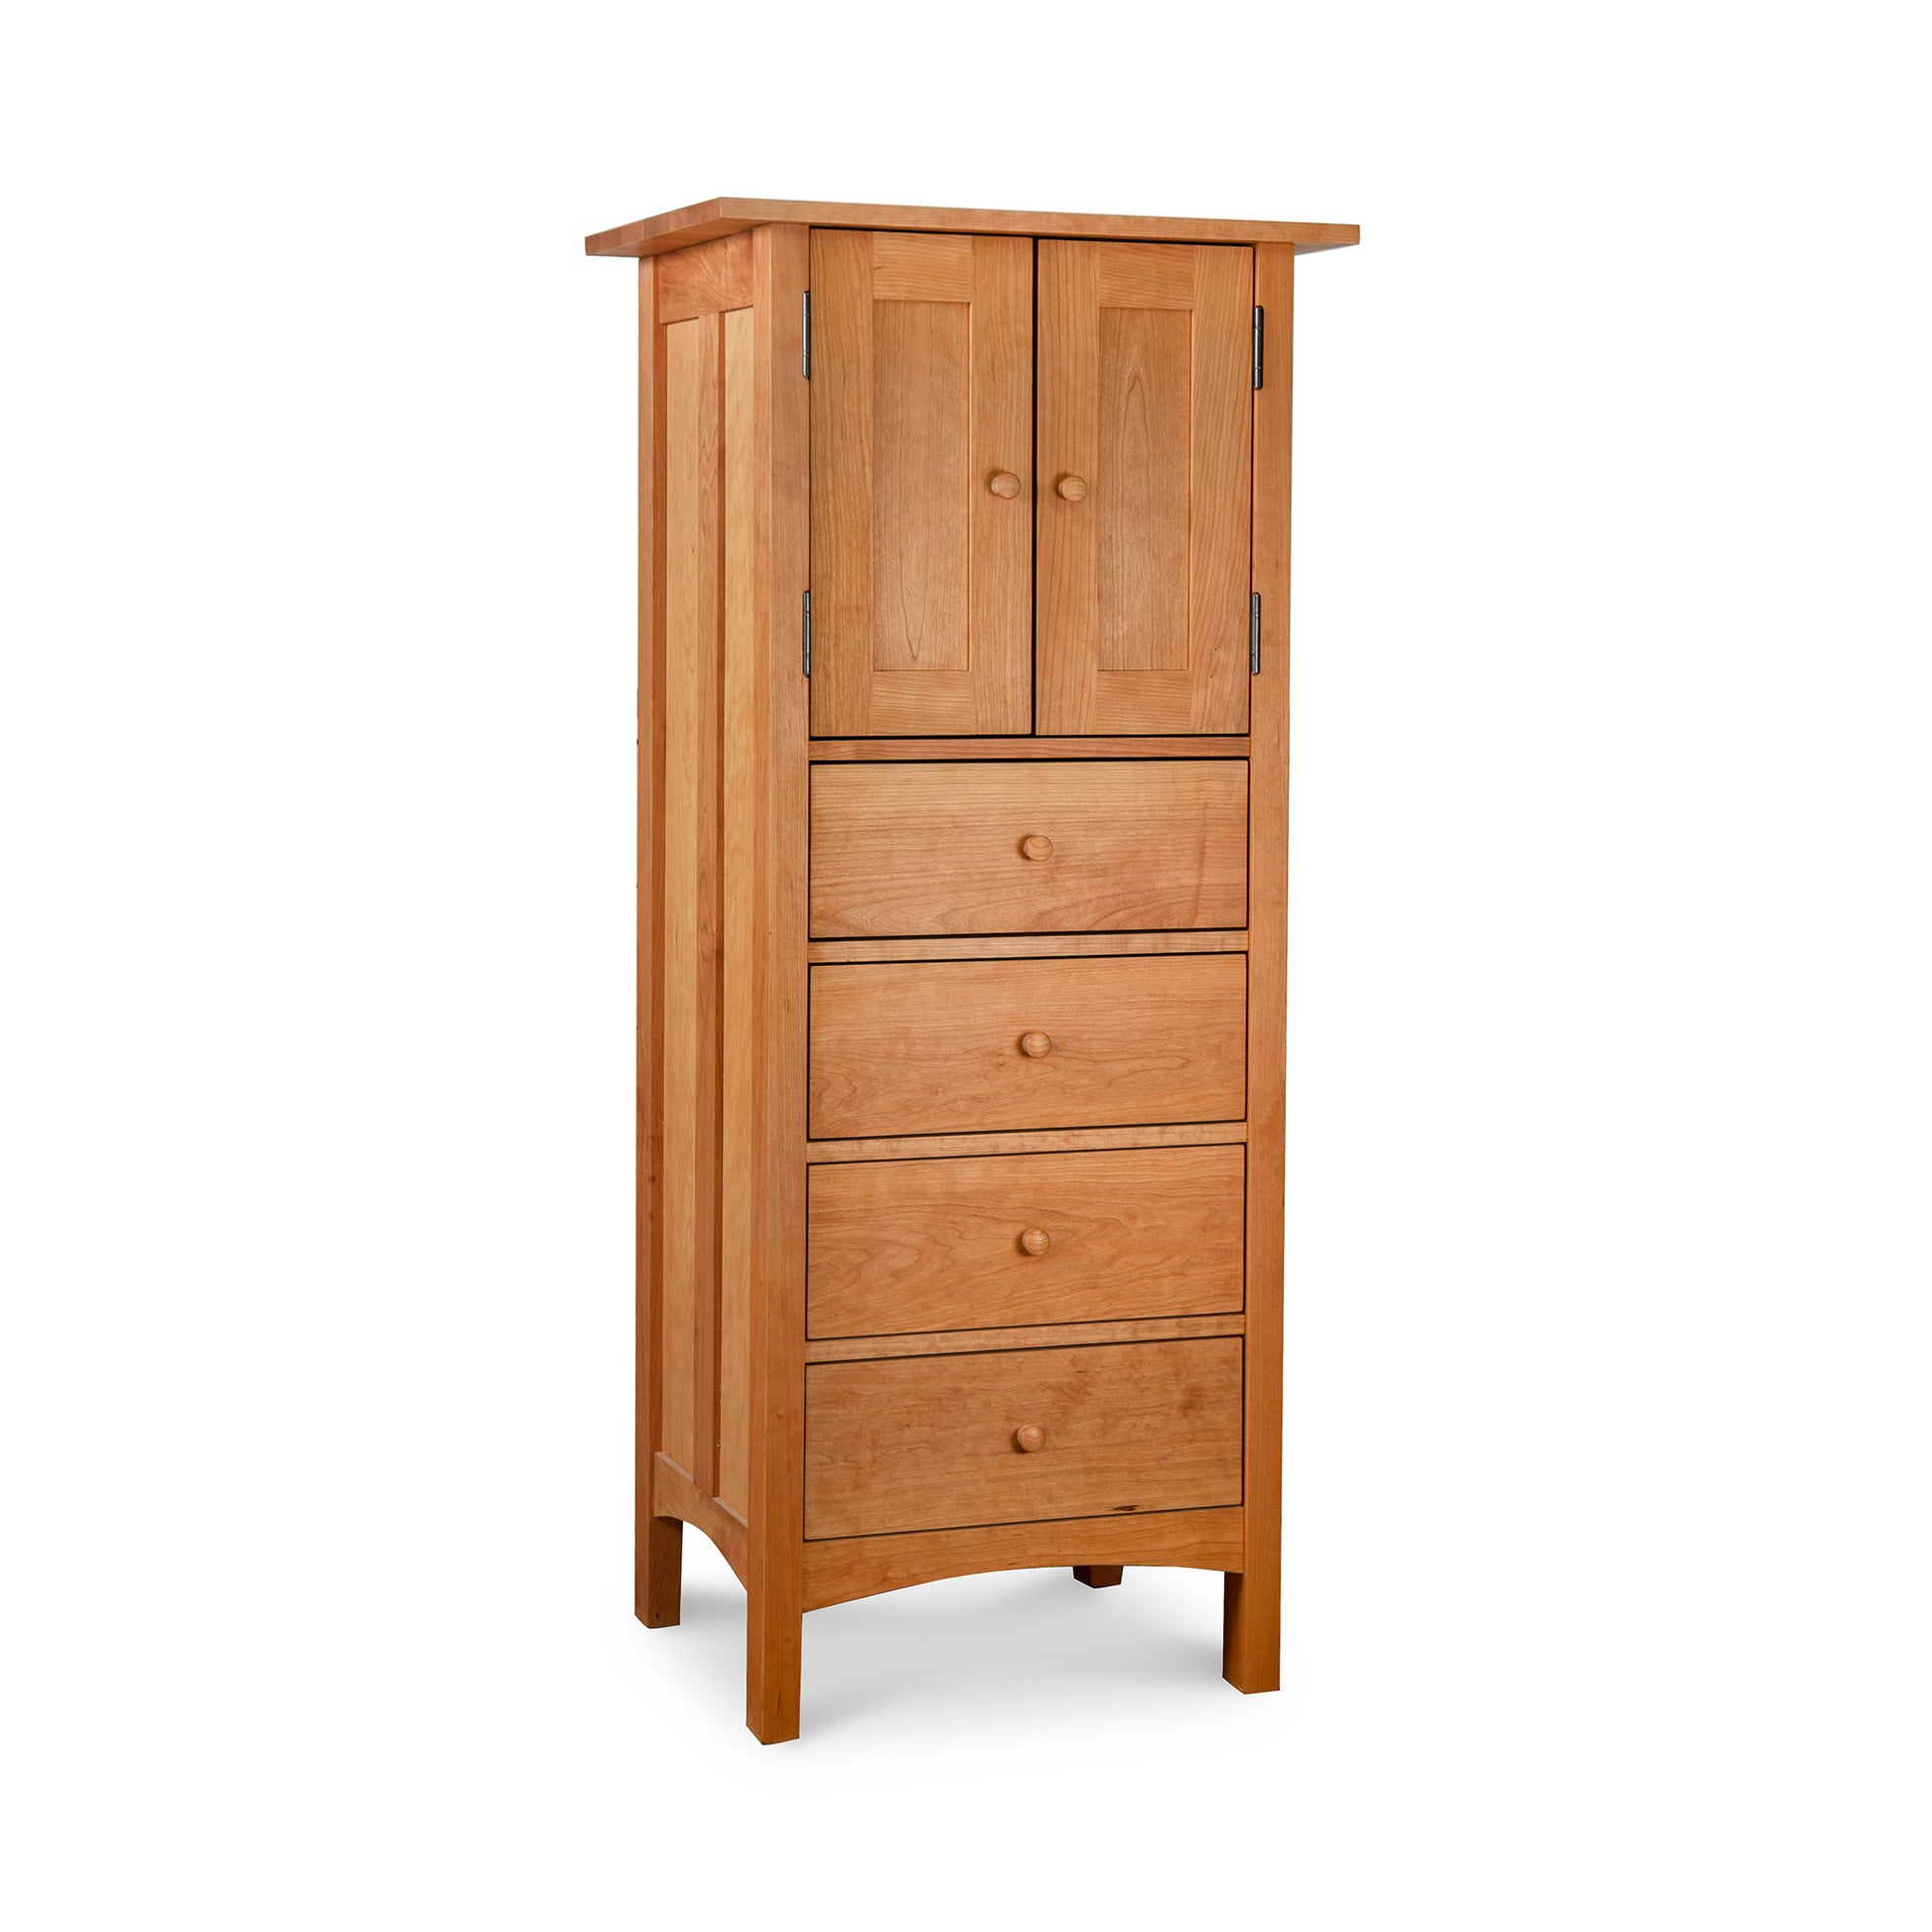 A Burlington Shaker Tall Storage Chest with drawers on top, made in solid wood and featuring a Shaker Style design by Vermont Furniture Designs.